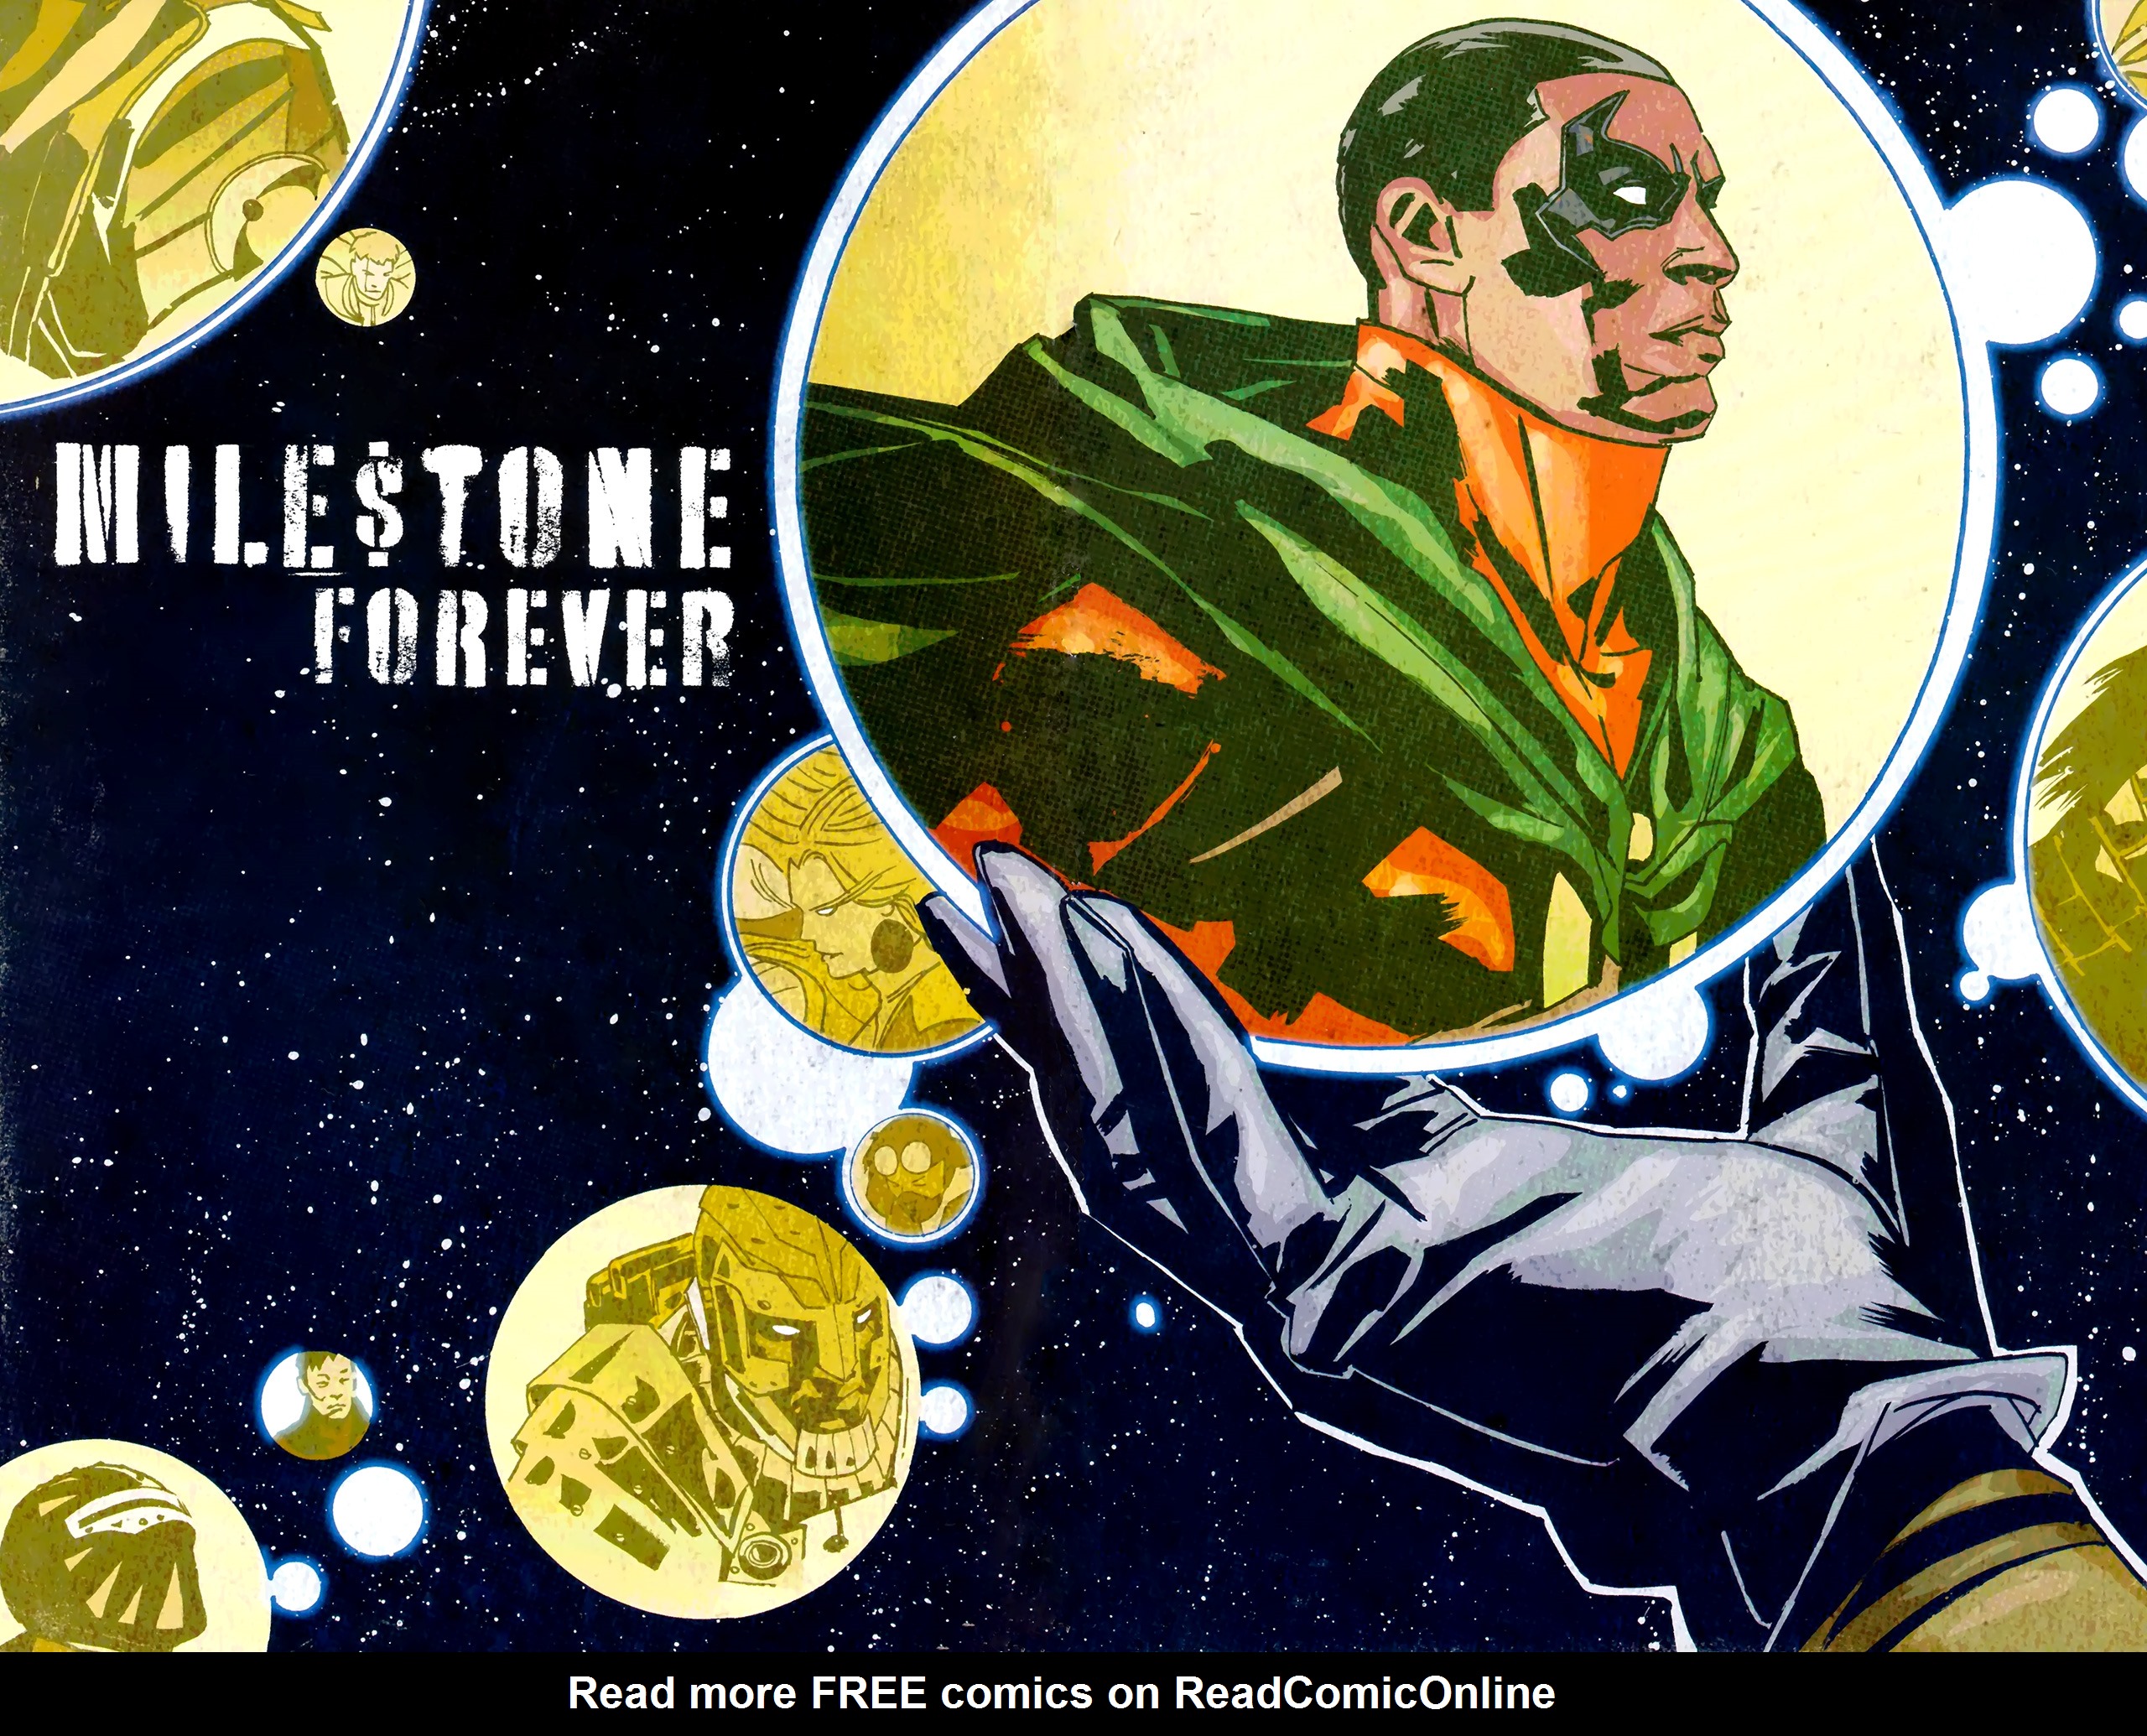 Read online Milestone Forever comic -  Issue #1 - 4